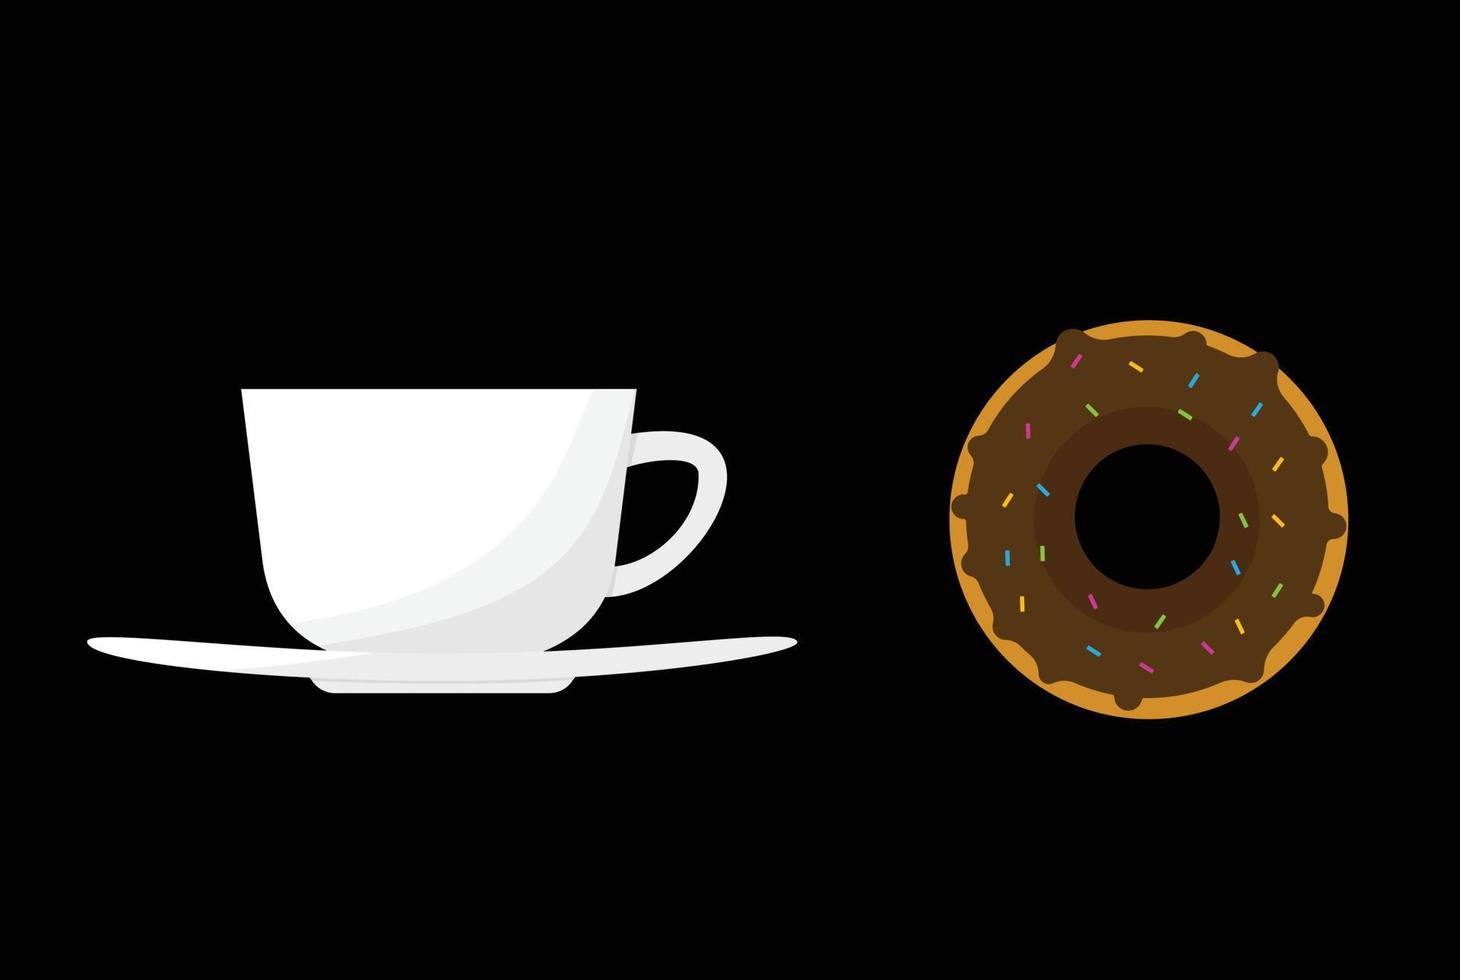 White cup of coffee and donut on black background. Vector illustration